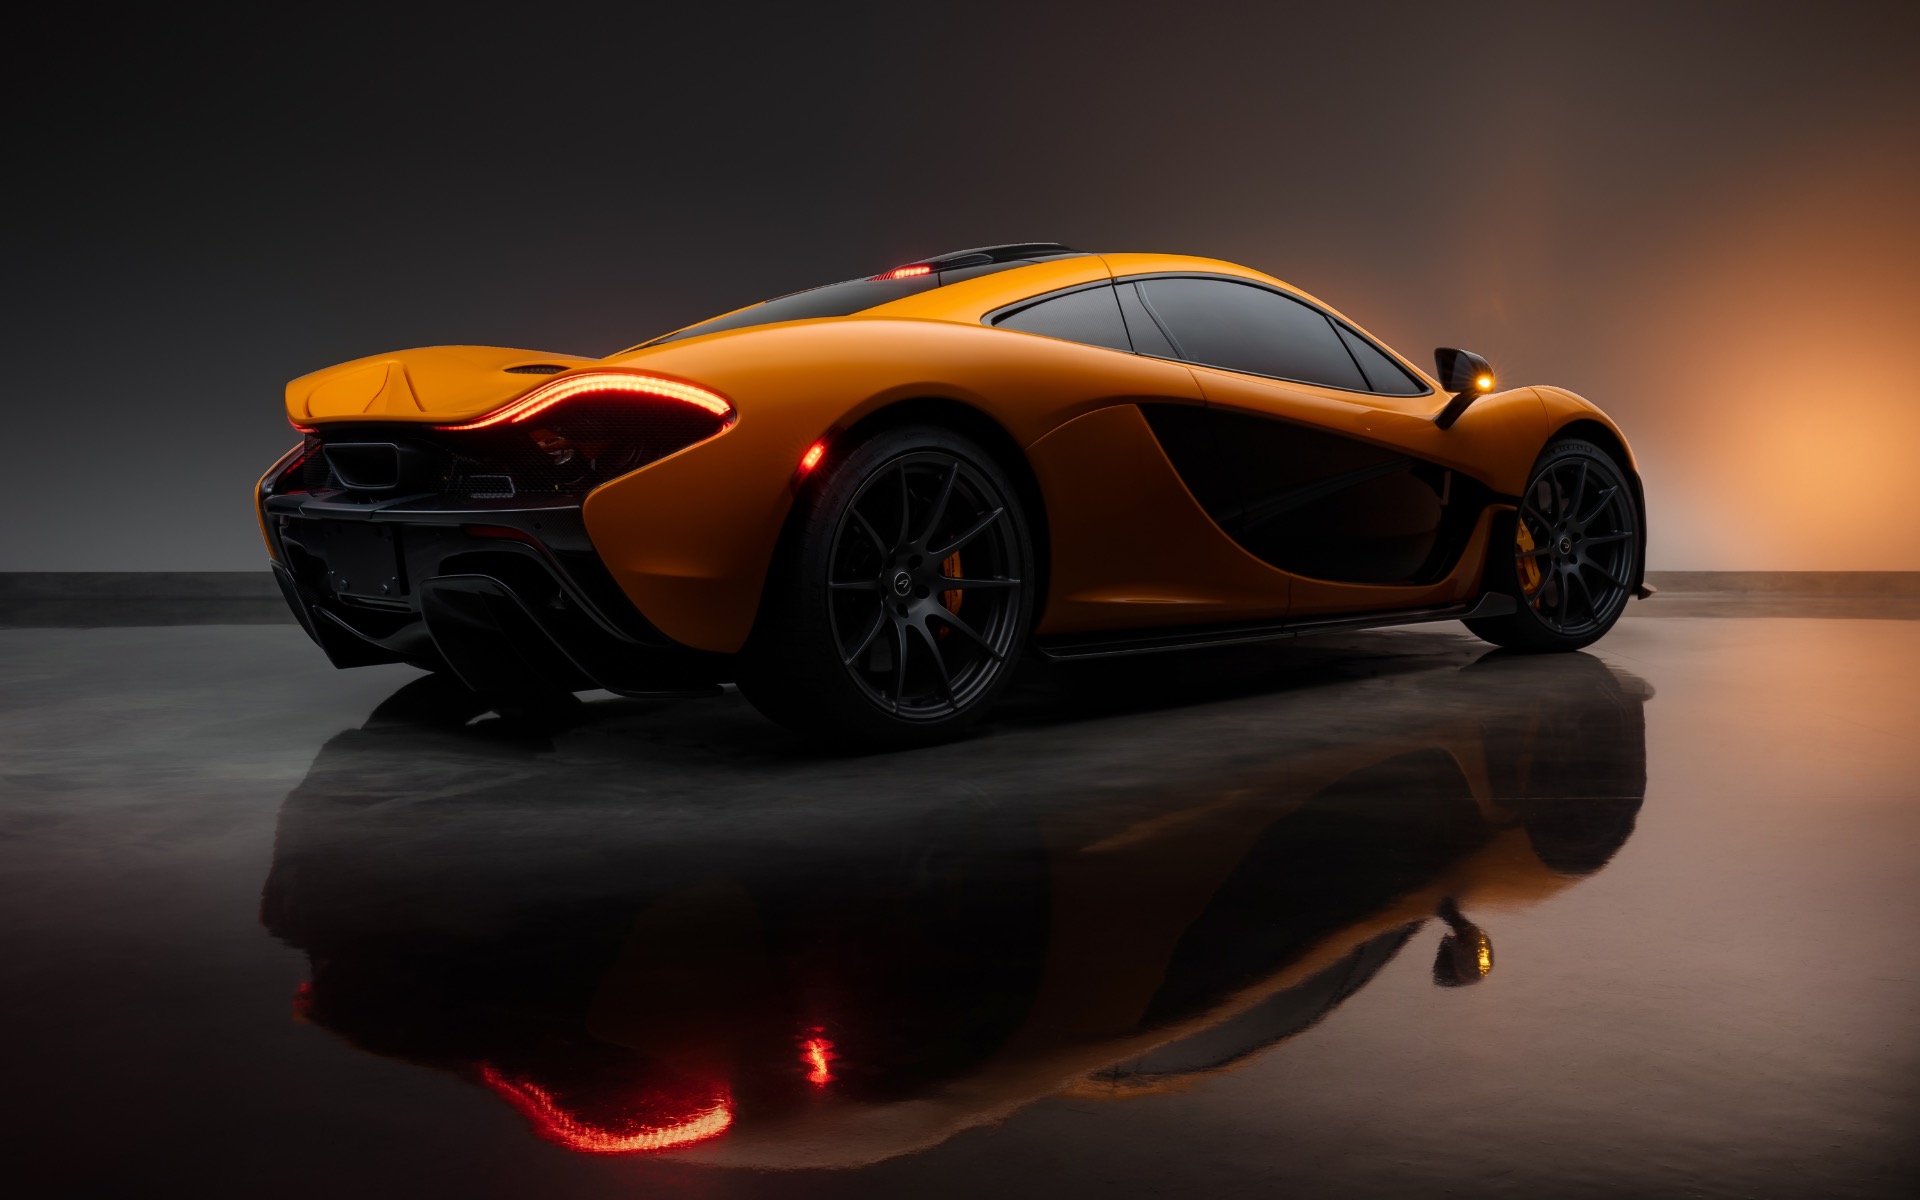 Used-2014-McLaren-P1-Coupe-Only-2930-Miles-Carbon-Fiber-Completely-Serviced-Collector-Quality